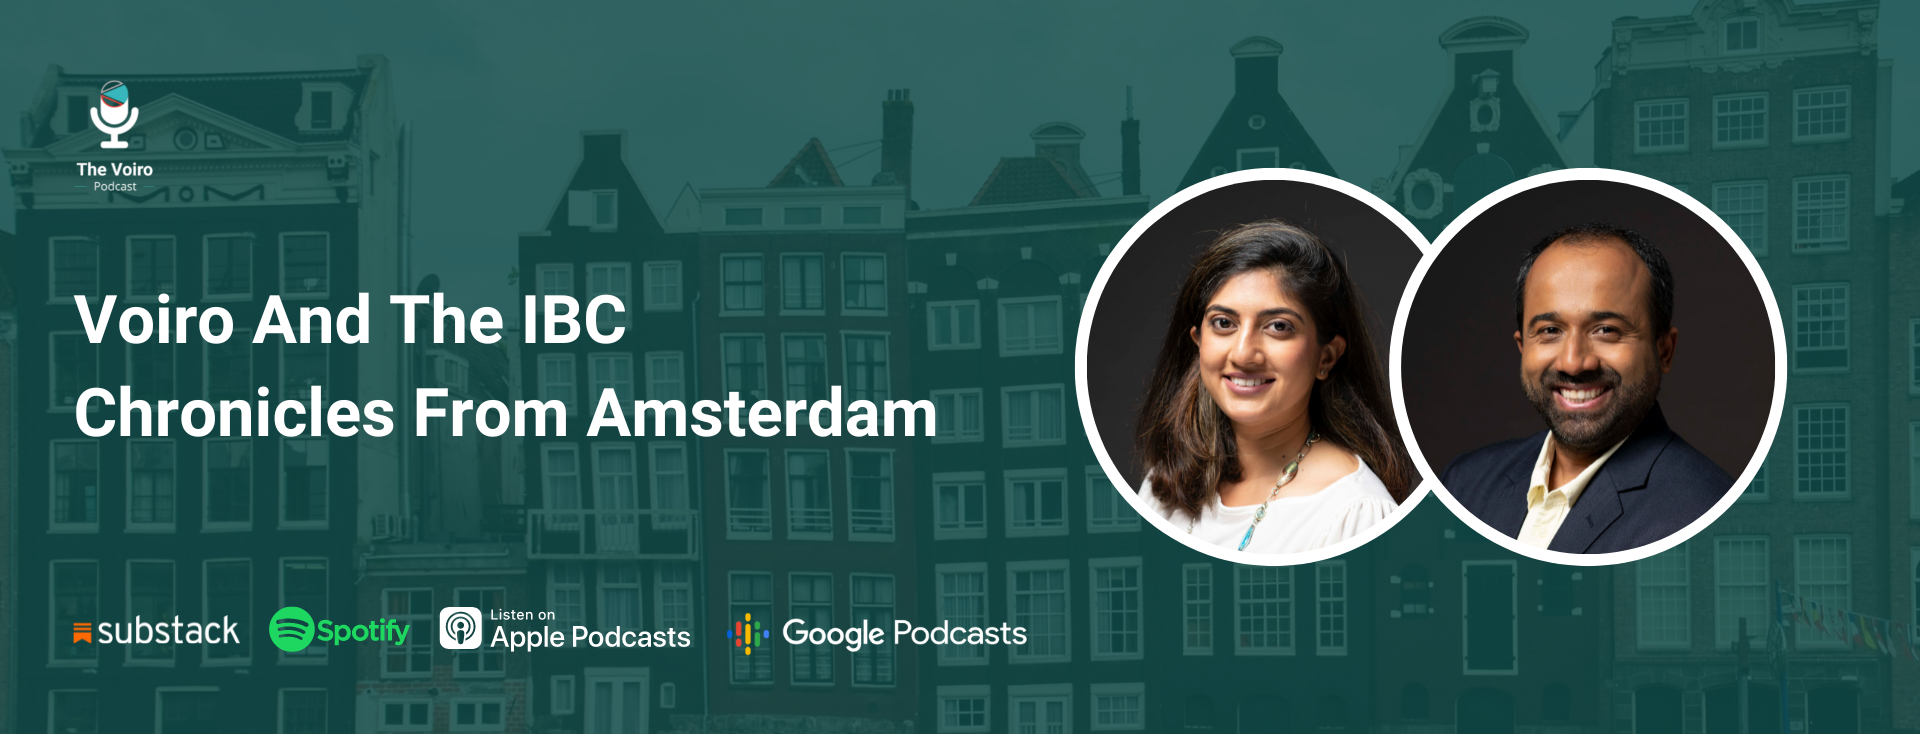 Voiro And The IBC Chronicles From Amsterdam - The Voiro Podcast